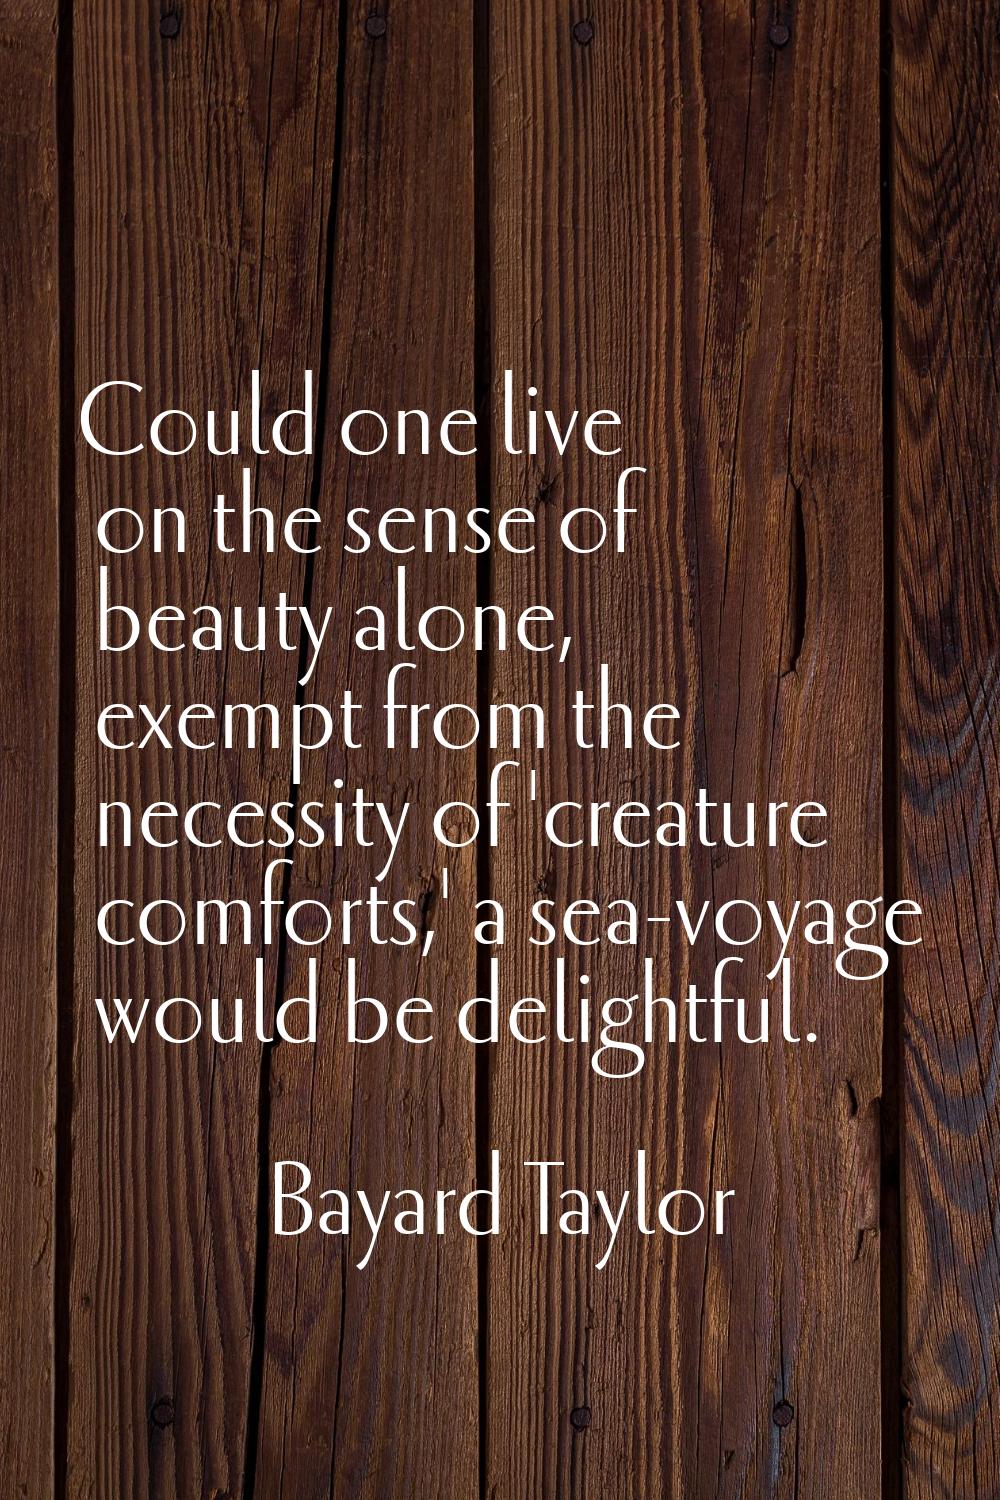 Could one live on the sense of beauty alone, exempt from the necessity of 'creature comforts,' a se